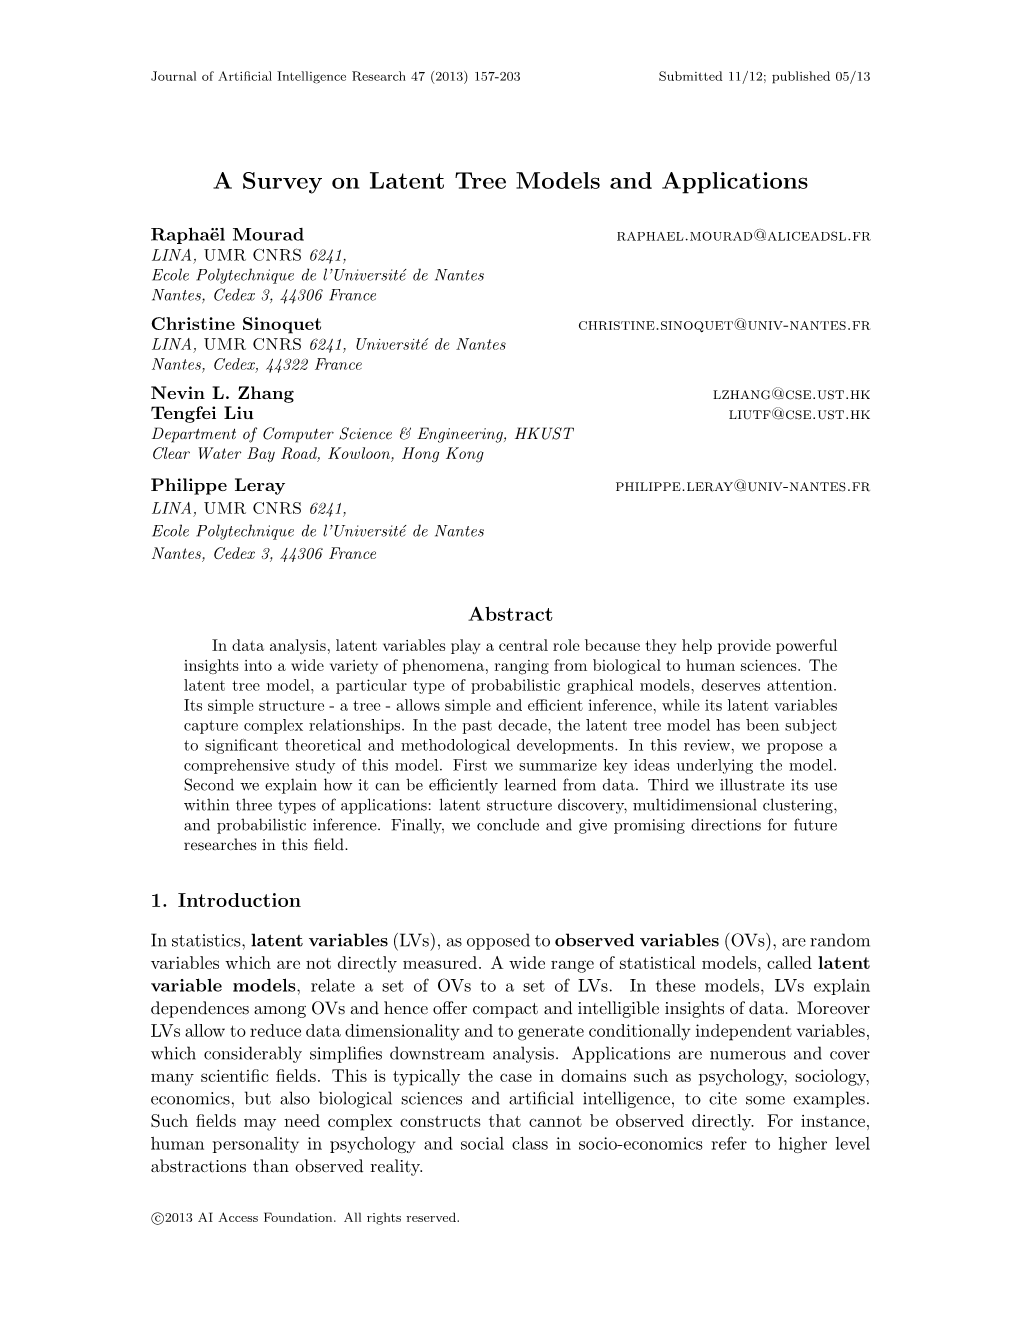 A Survey on Latent Tree Models and Applications